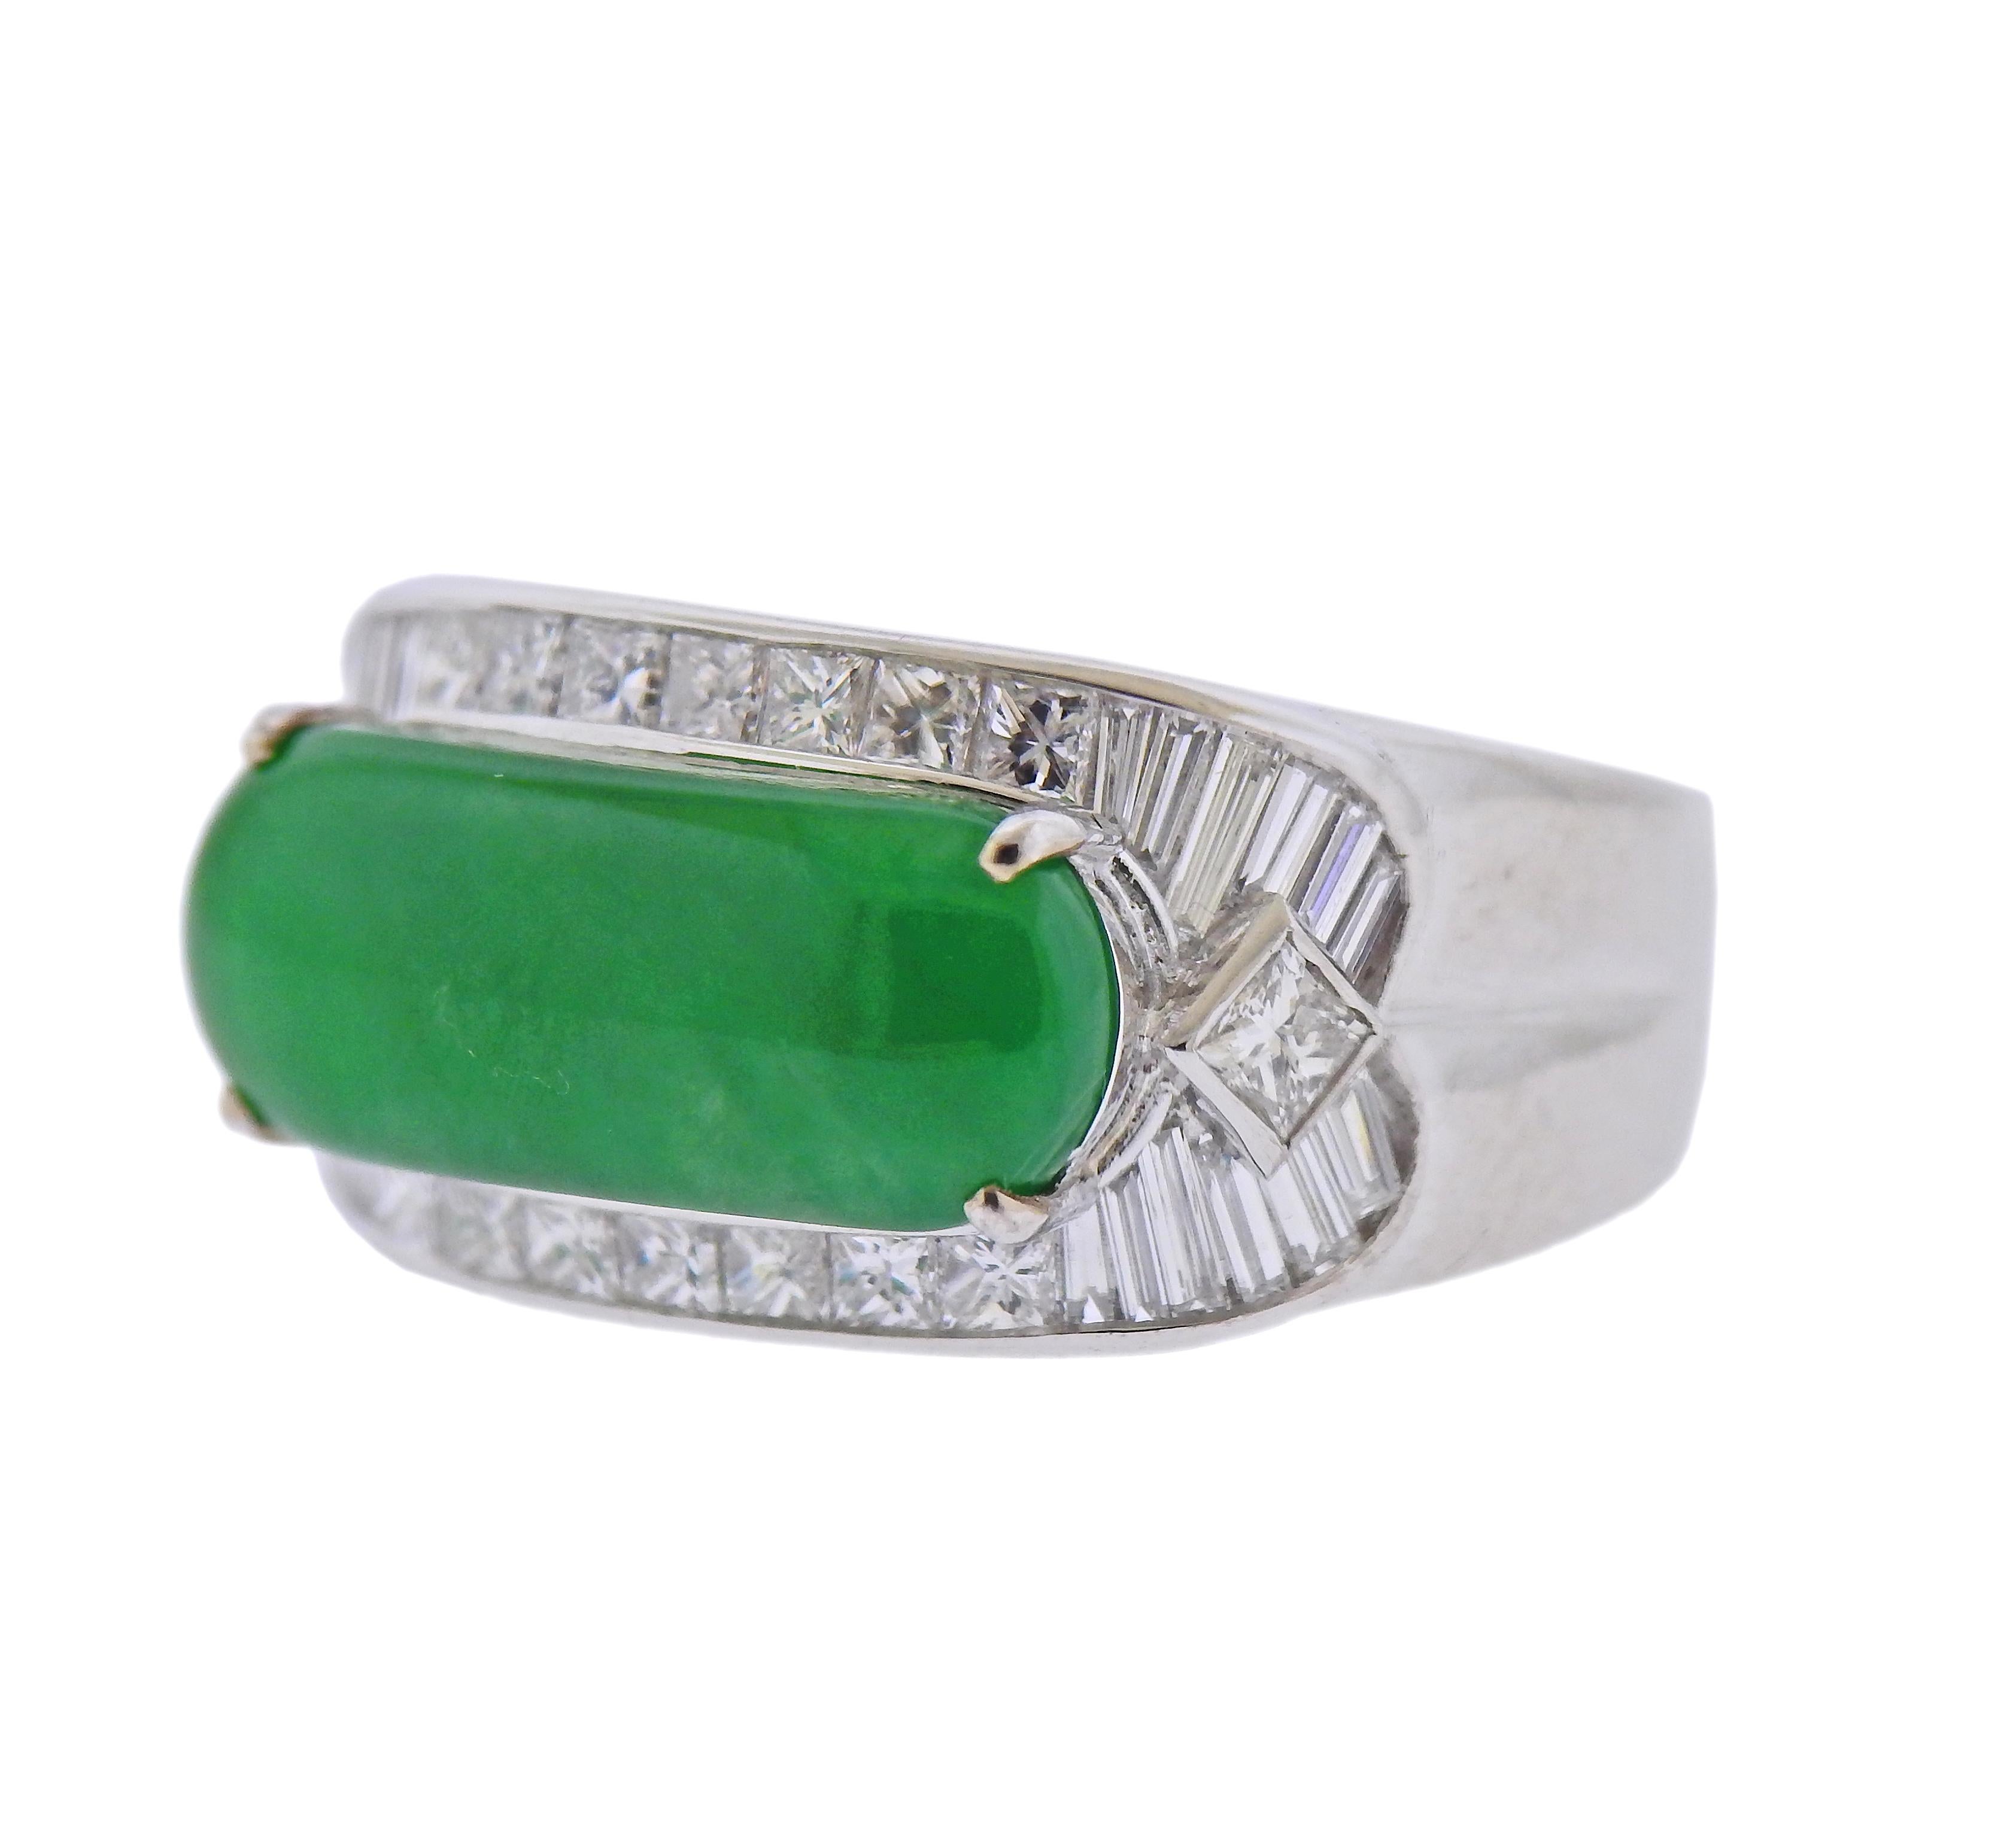 18k white gold ring, with 18.5mm x 7.4mm jade, surrounded with approx. 1.30ctw in diamonds. ring size - 8.5, ring top is 12.5mm wide. Marked 750. Weight - 12.1 grams.